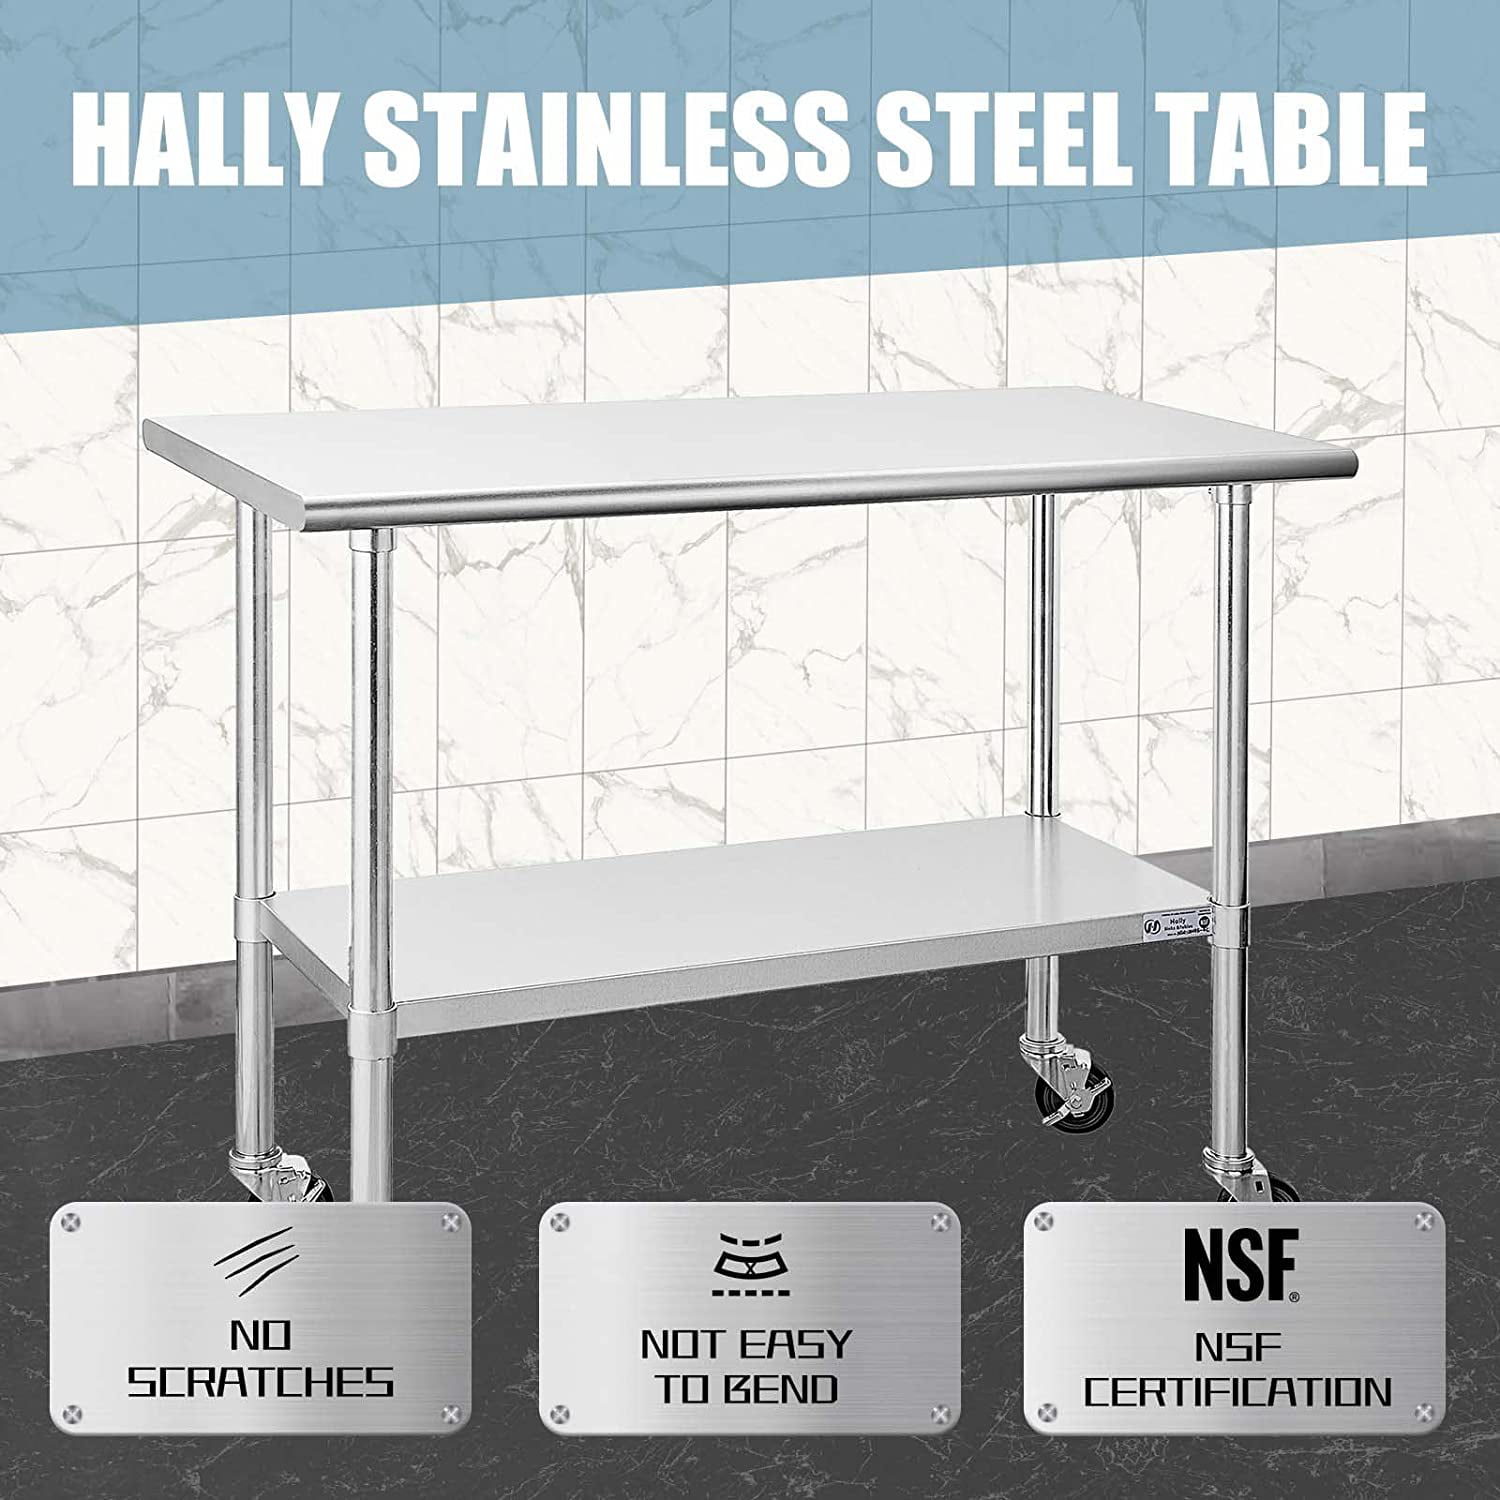 Home and Hotel NSF Commercial Heavy Duty Table with Undershelf and Galvanized Legs for Restaurant Hally Stainless Steel Table for Prep & Work 24 x 48 Inches 